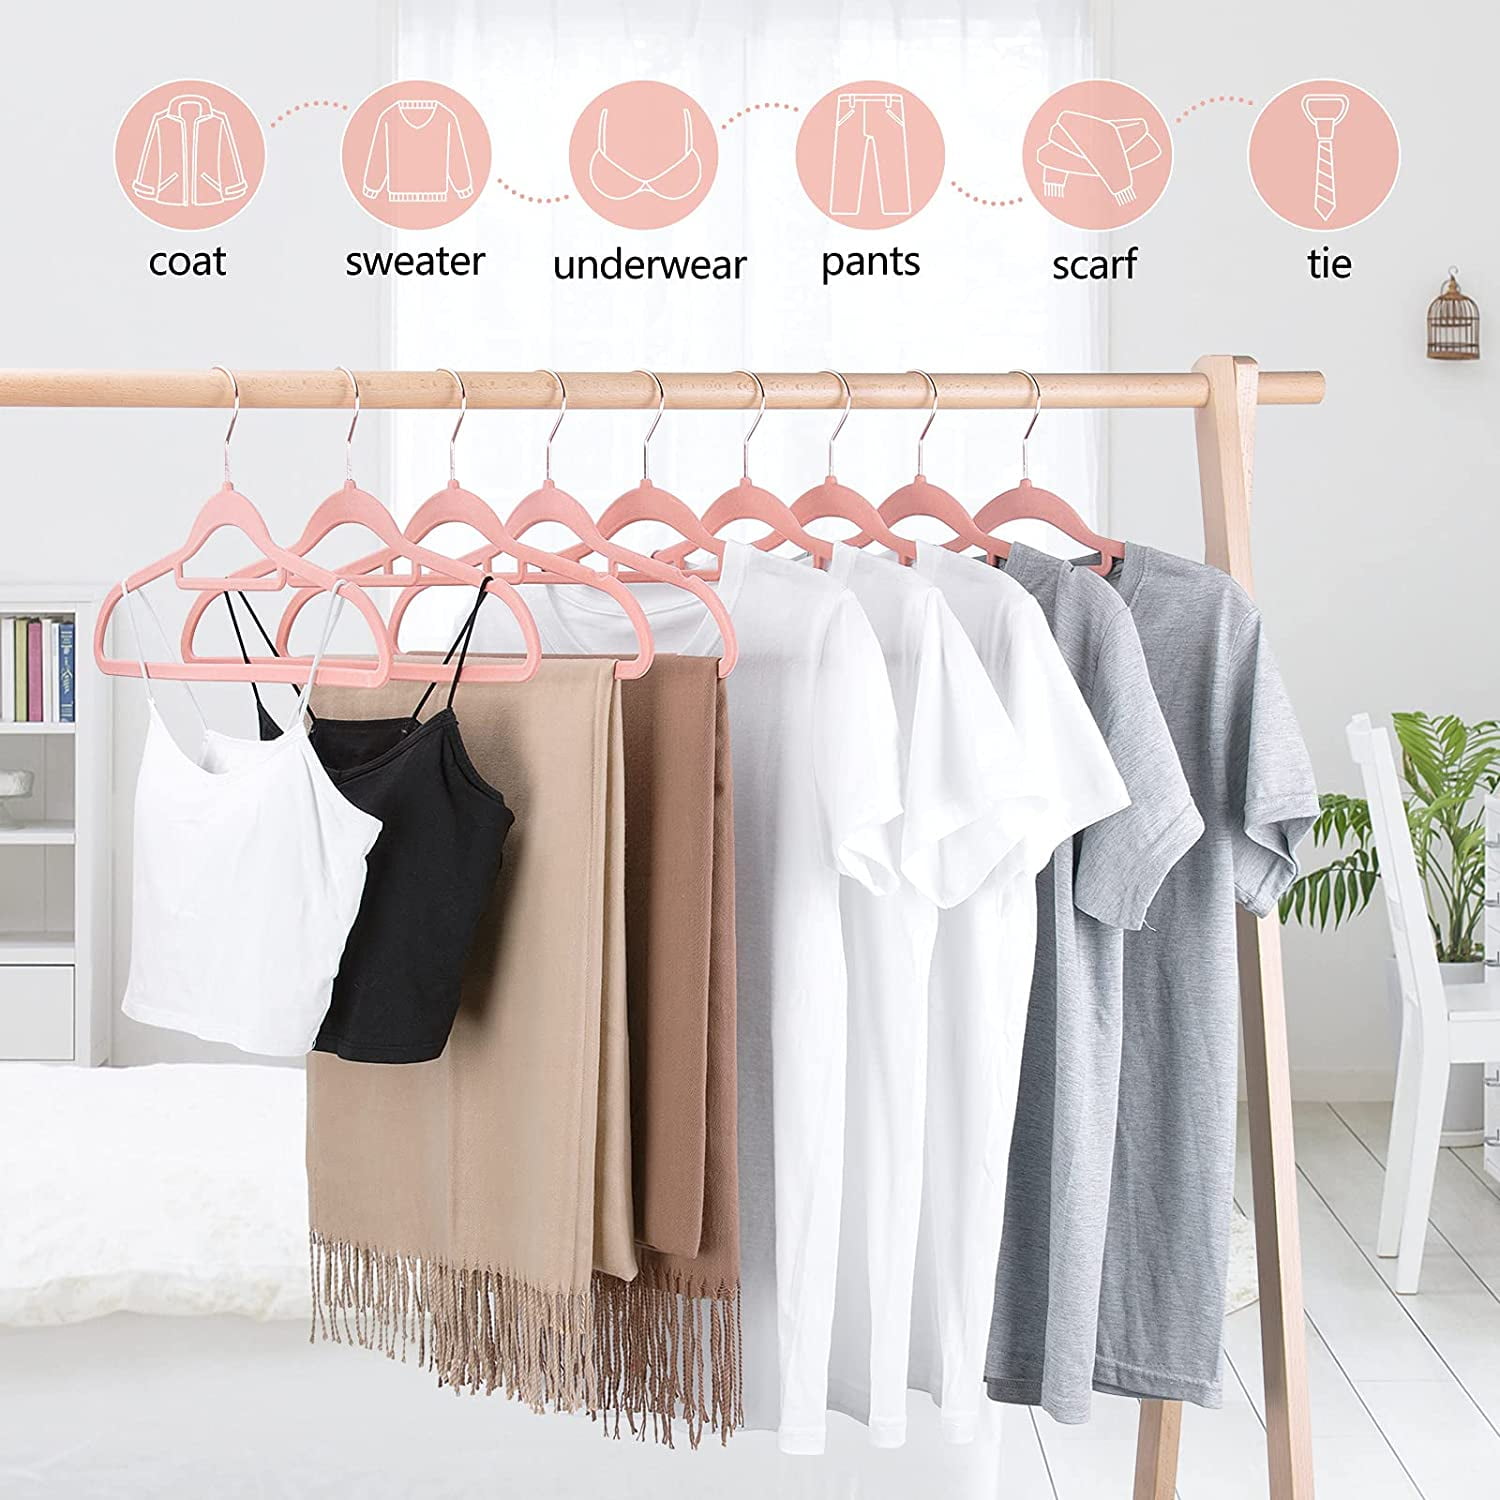 VECELO 25 Pack Clothes Hangers, Non-Slip Plastic Coat Hanger, 360°Swivel Hook & Space Saving for Bedroom Closet, Great for Shirts, Pants, Excellent